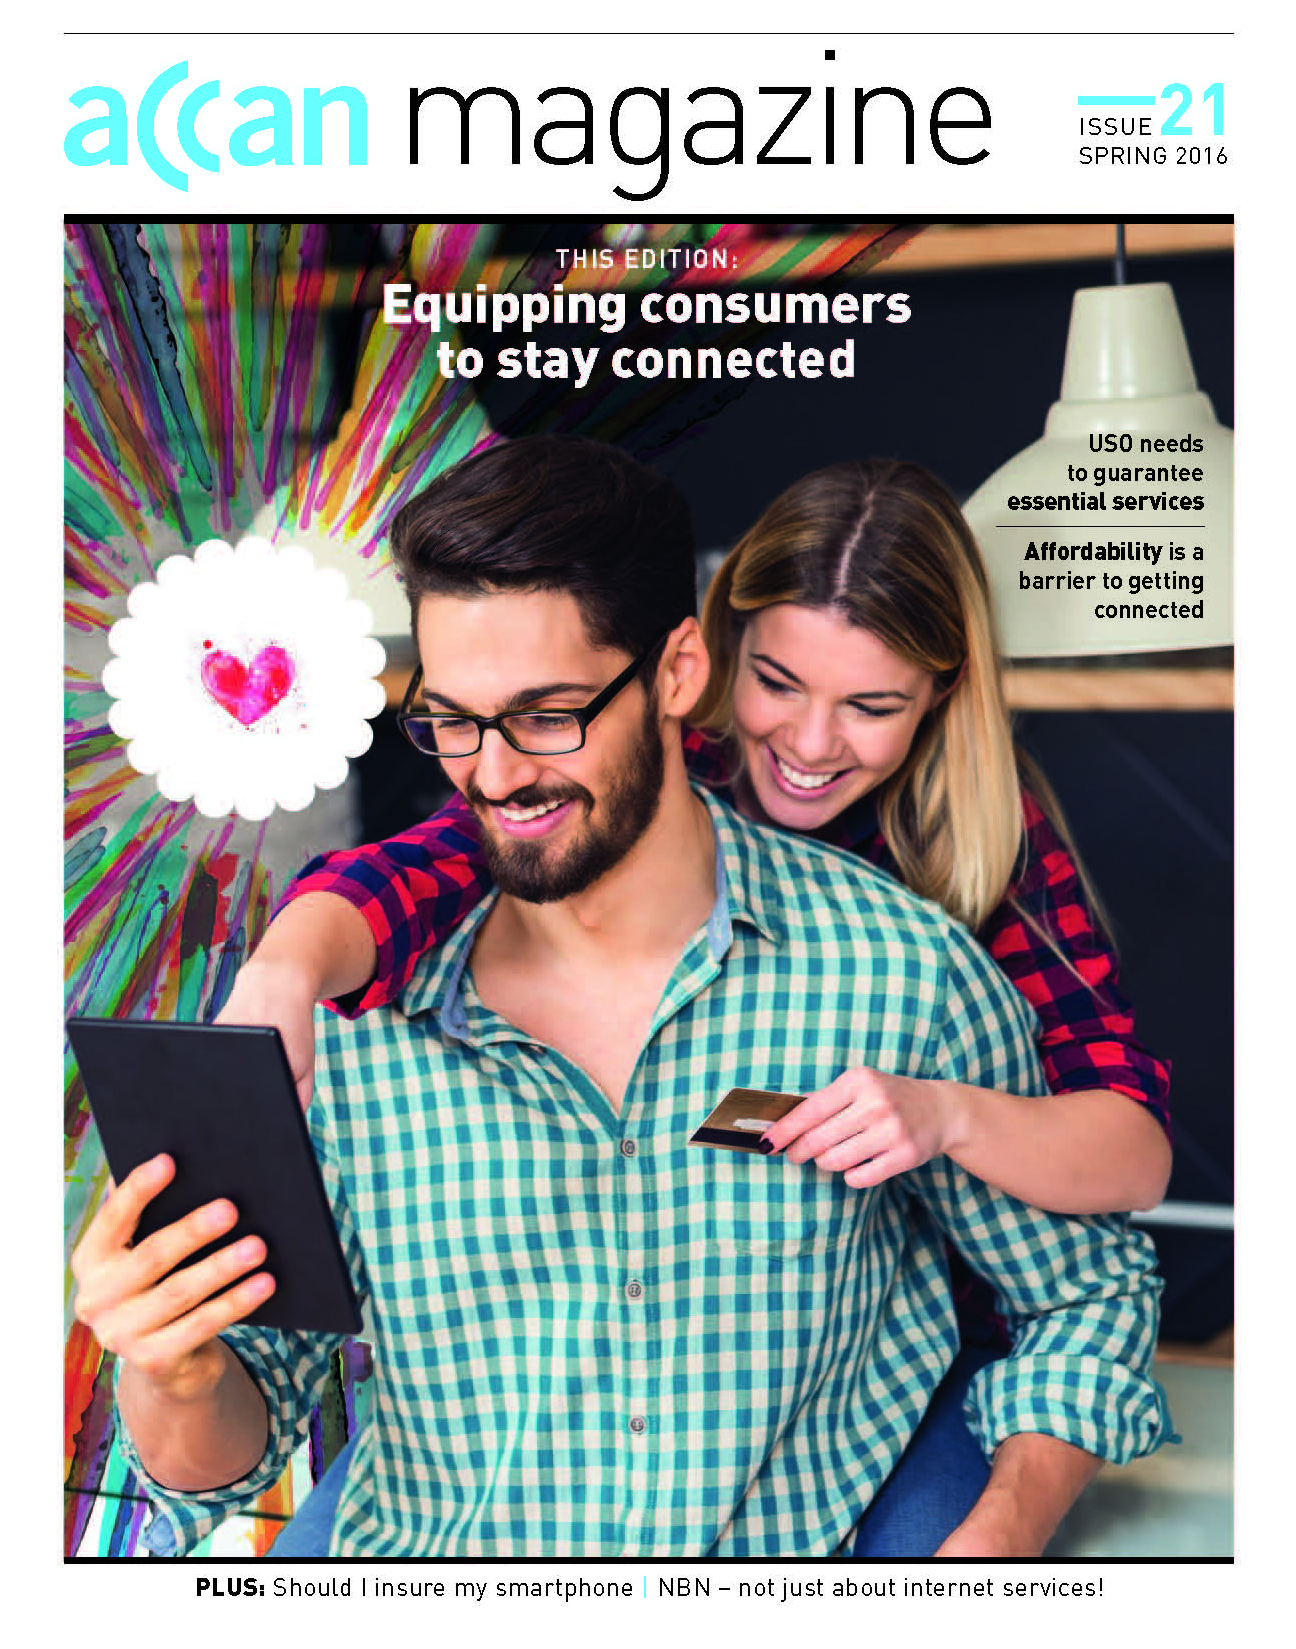 Equipping consumers to stay connected magazine cover